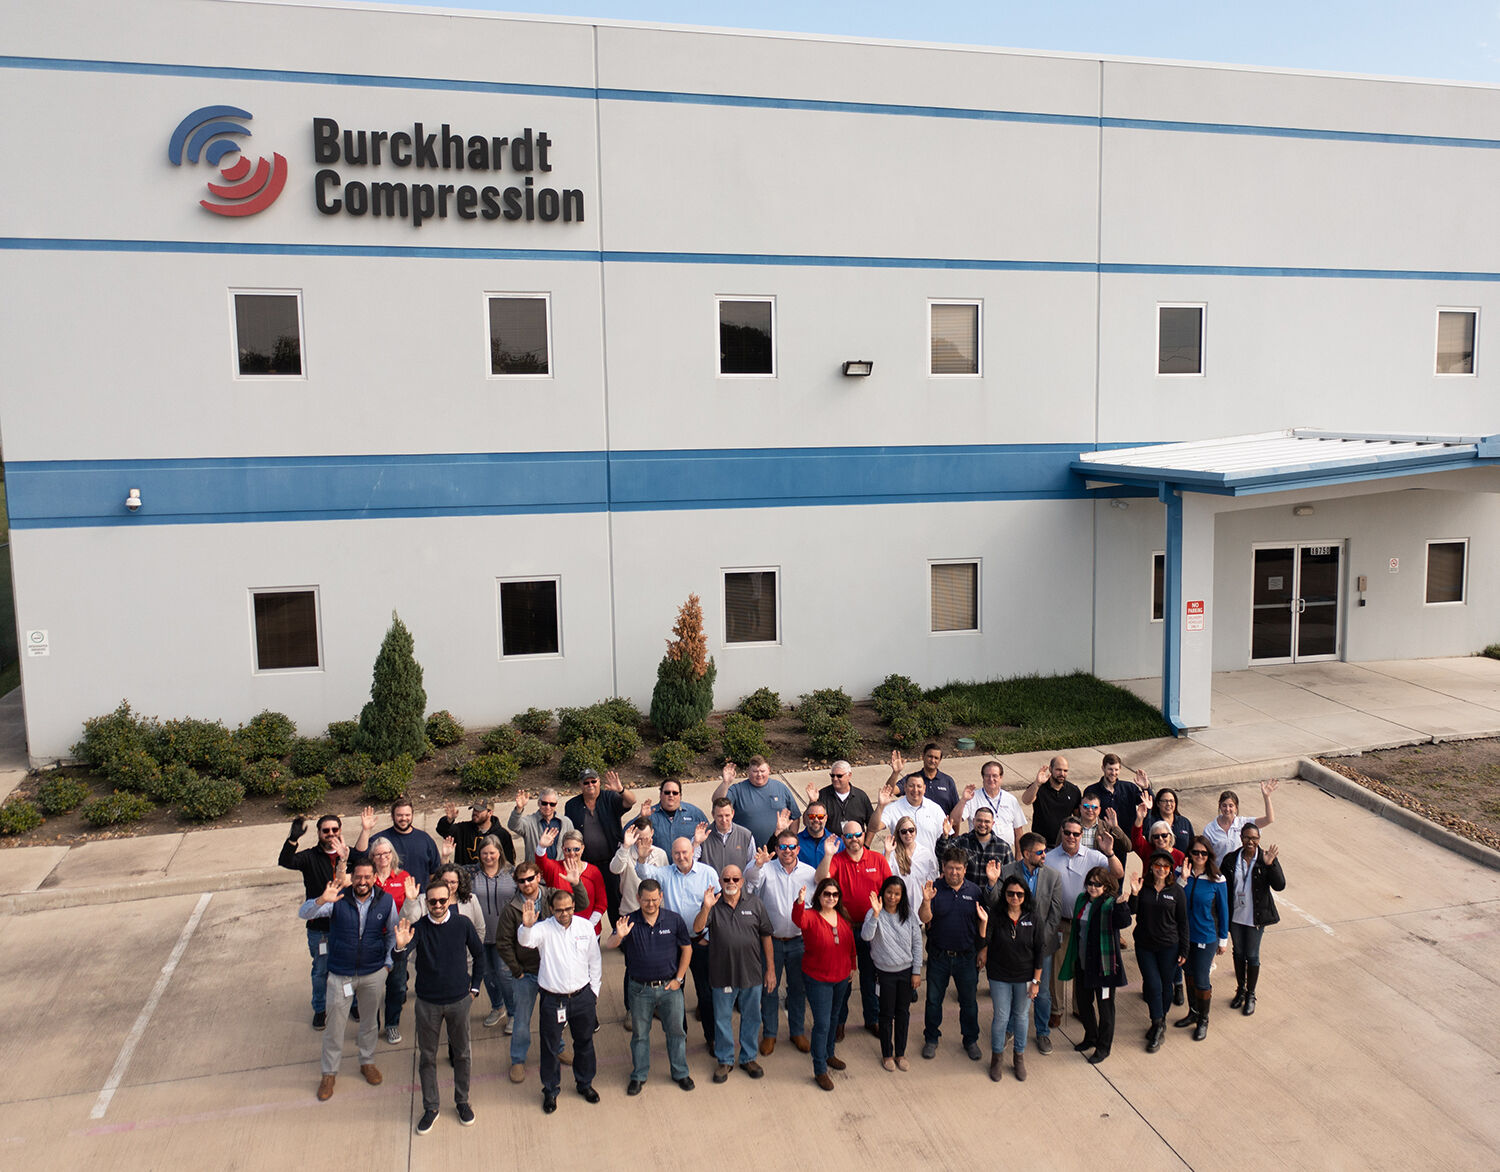 One-stop shop for compressor services